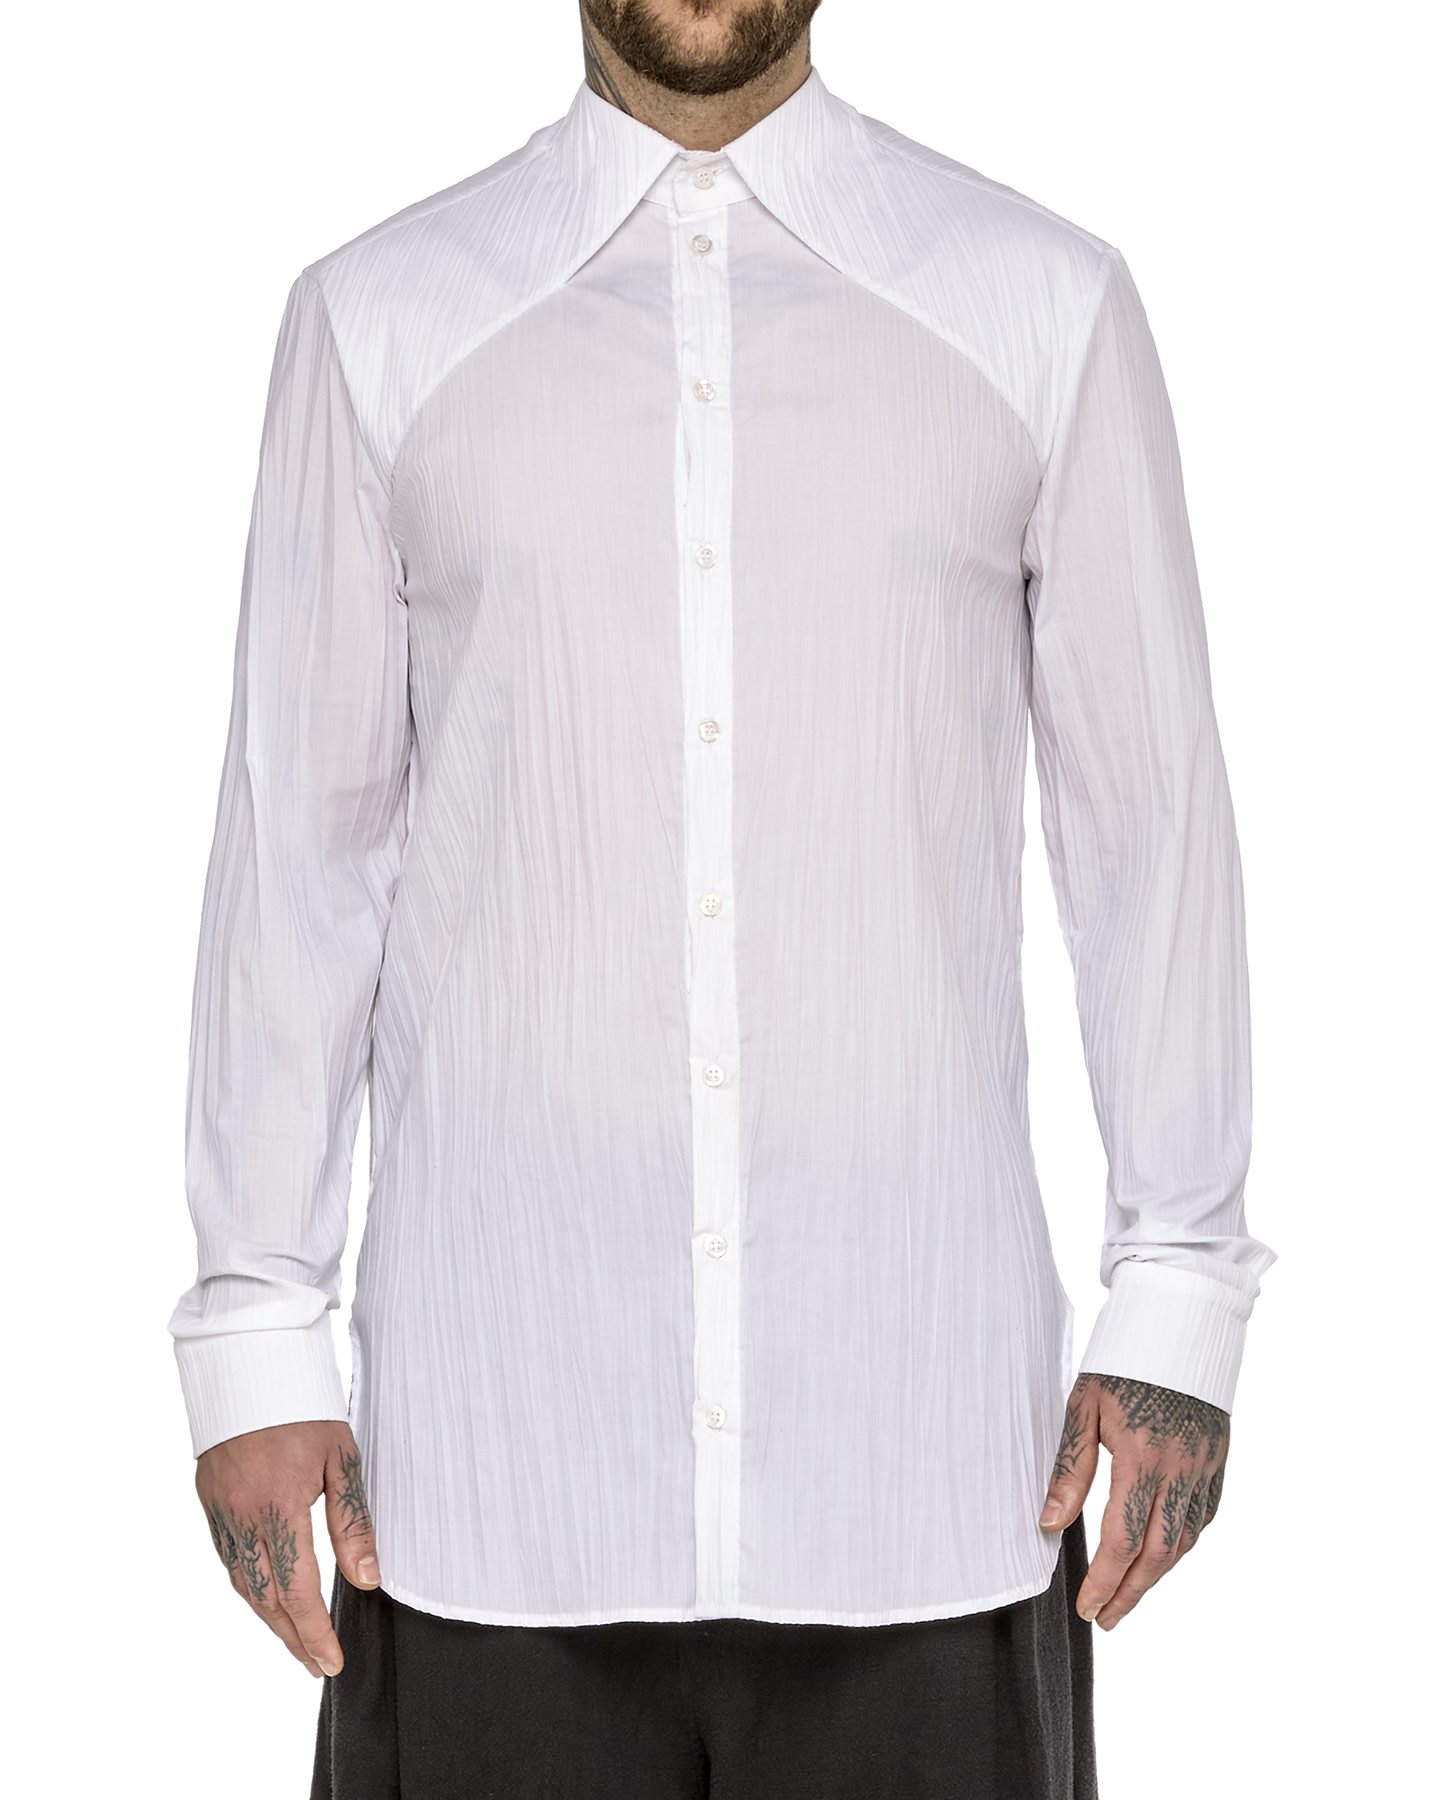 CRINKLED SHIRT WITH INTEGRATED COLLAR - WHITE